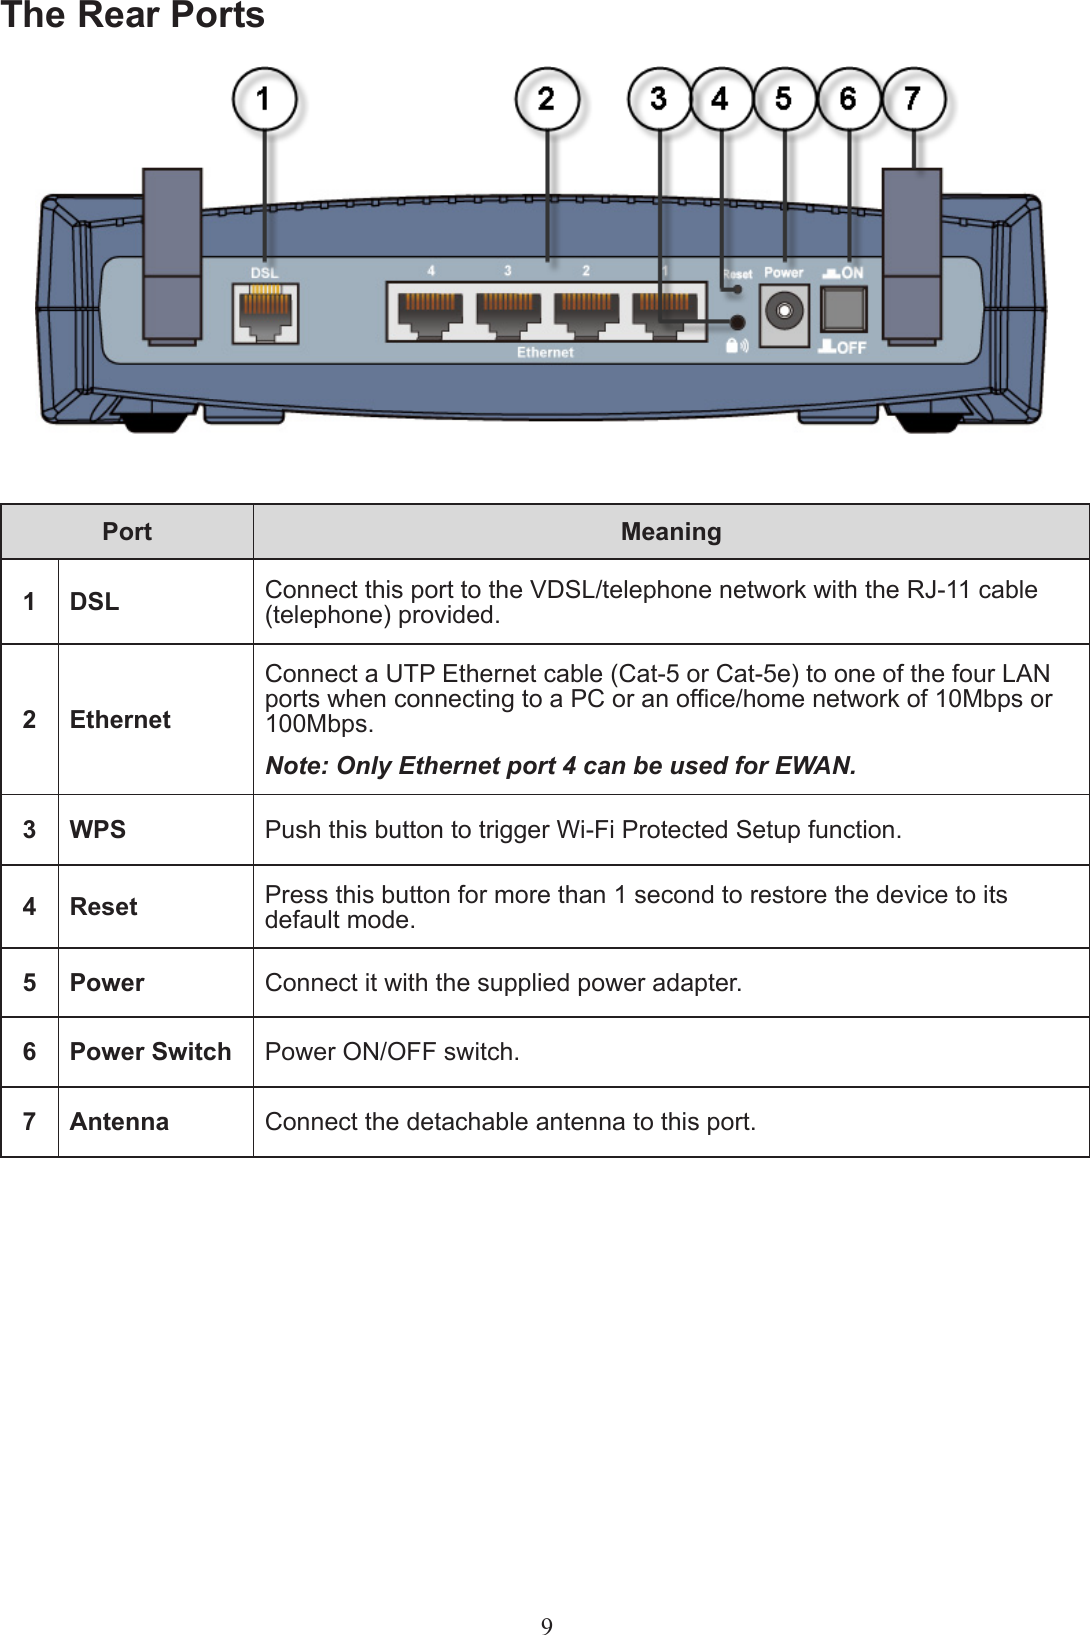 9The Rear Ports Port Meaning1 DSL Connect this port to the VDSL/telephone network with the RJ-11 cable (telephone) provided.2 EthernetConnect a UTP Ethernet cable (Cat-5 or Cat-5e) to one of the four LAN ports when connecting to a PC or an ofce/home network of 10Mbps or 100Mbps.Note: Only Ethernet port 4 can be used for EWAN.3 WPS Push this button to trigger Wi-Fi Protected Setup function.4 Reset Press this button for more than 1 second to restore the device to its default mode.5 Power Connect it with the supplied power adapter.6 Power Switch Power ON/OFF switch.7 Antenna  Connect the detachable antenna to this port.